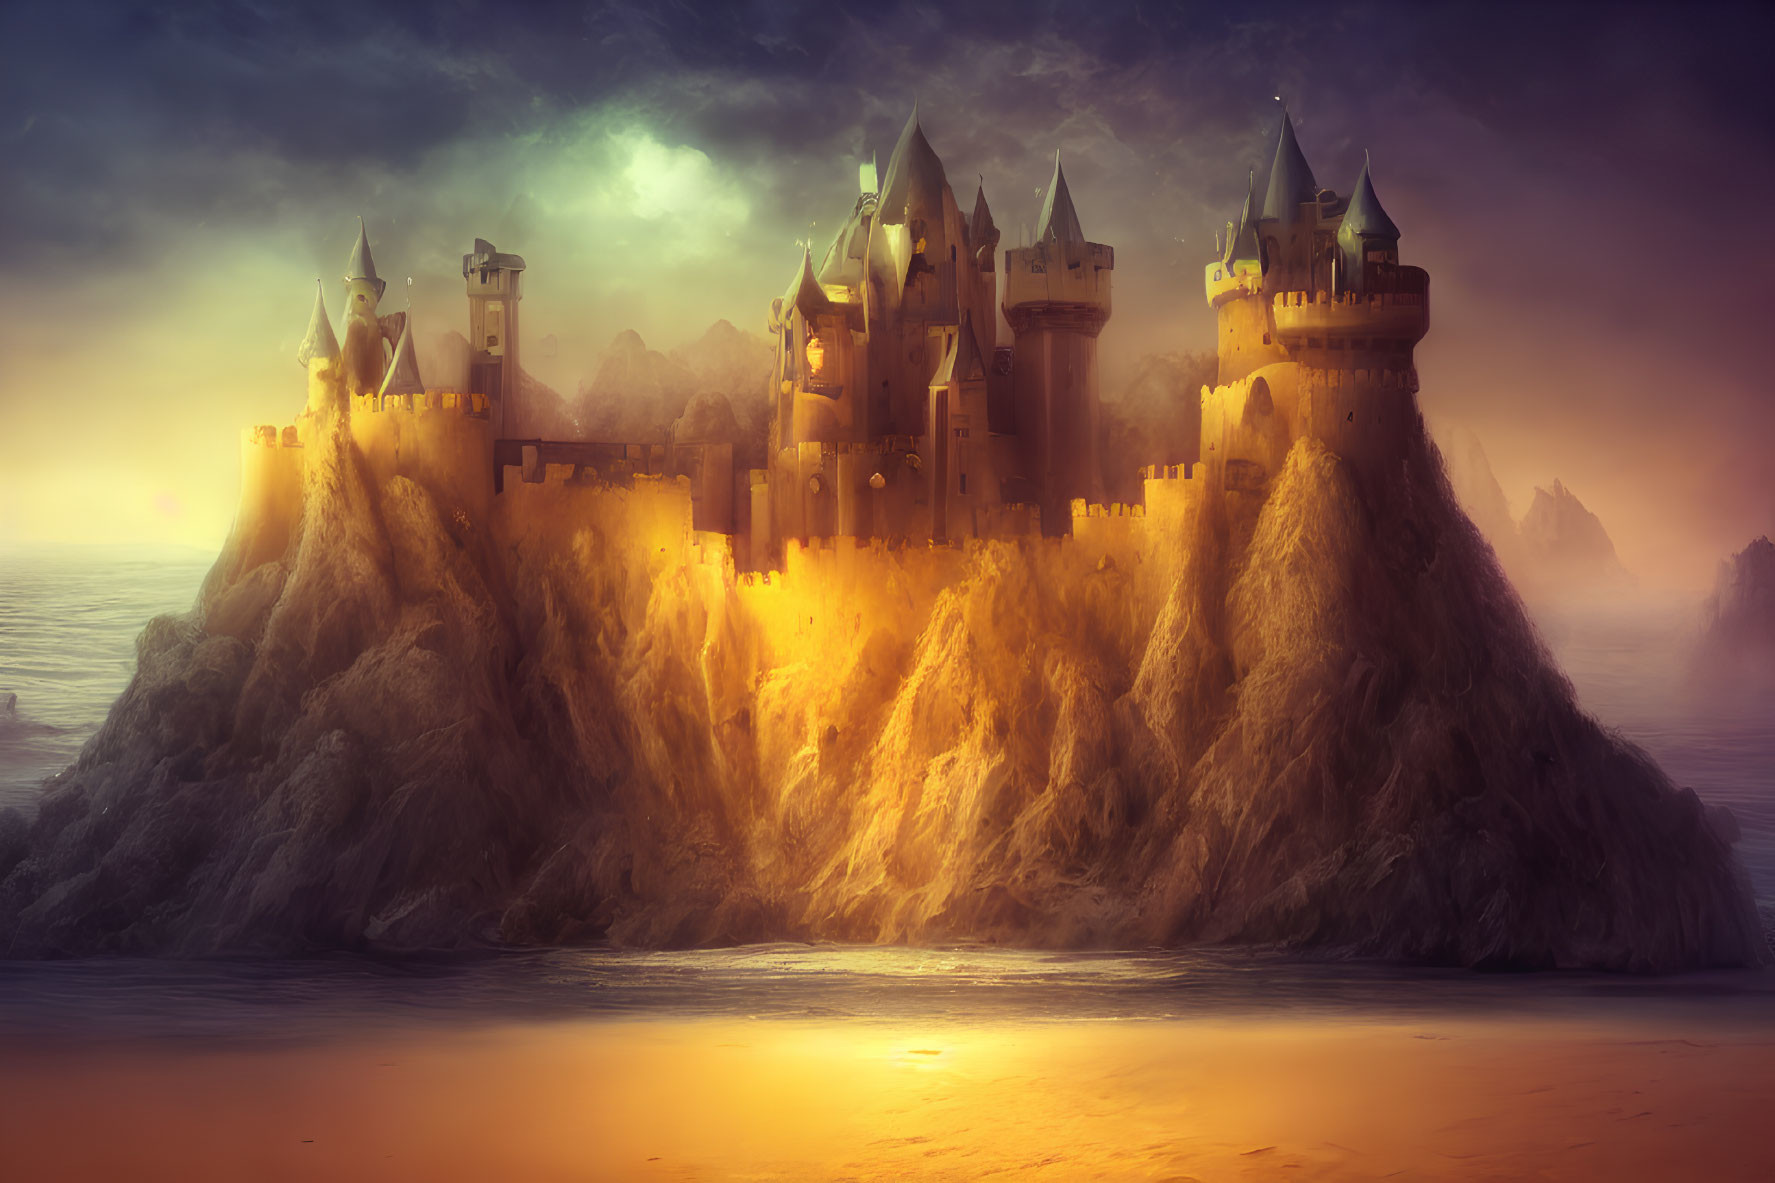 Fantasy castle on cliff at sunset with golden glow and ocean waves